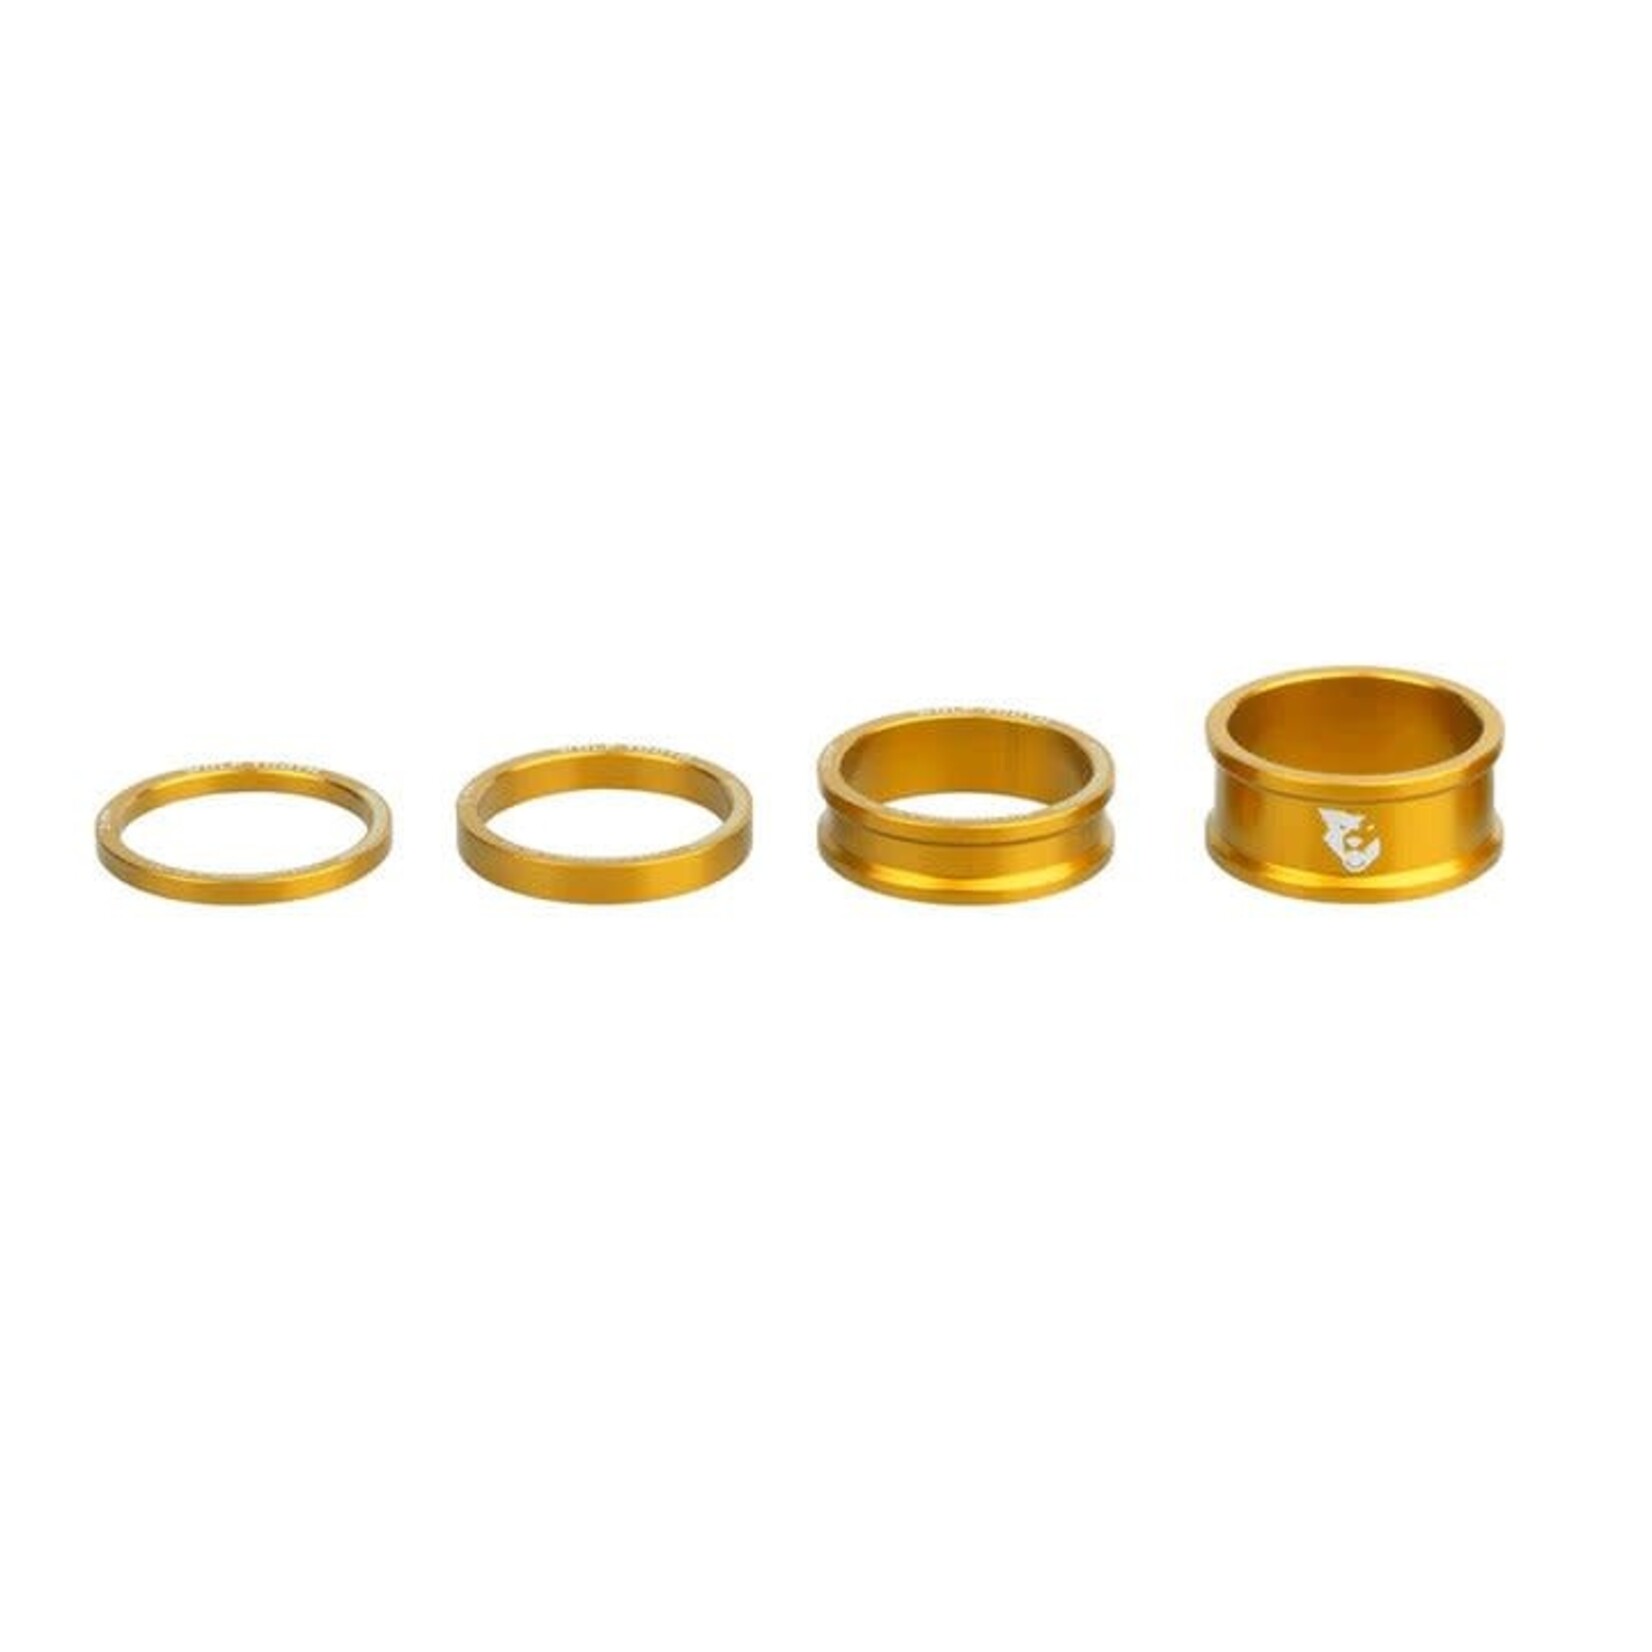 Wolf Tooth Components Wolf Tooth Headset Spacer Kit 3, 5, 10, 15mm, Gold